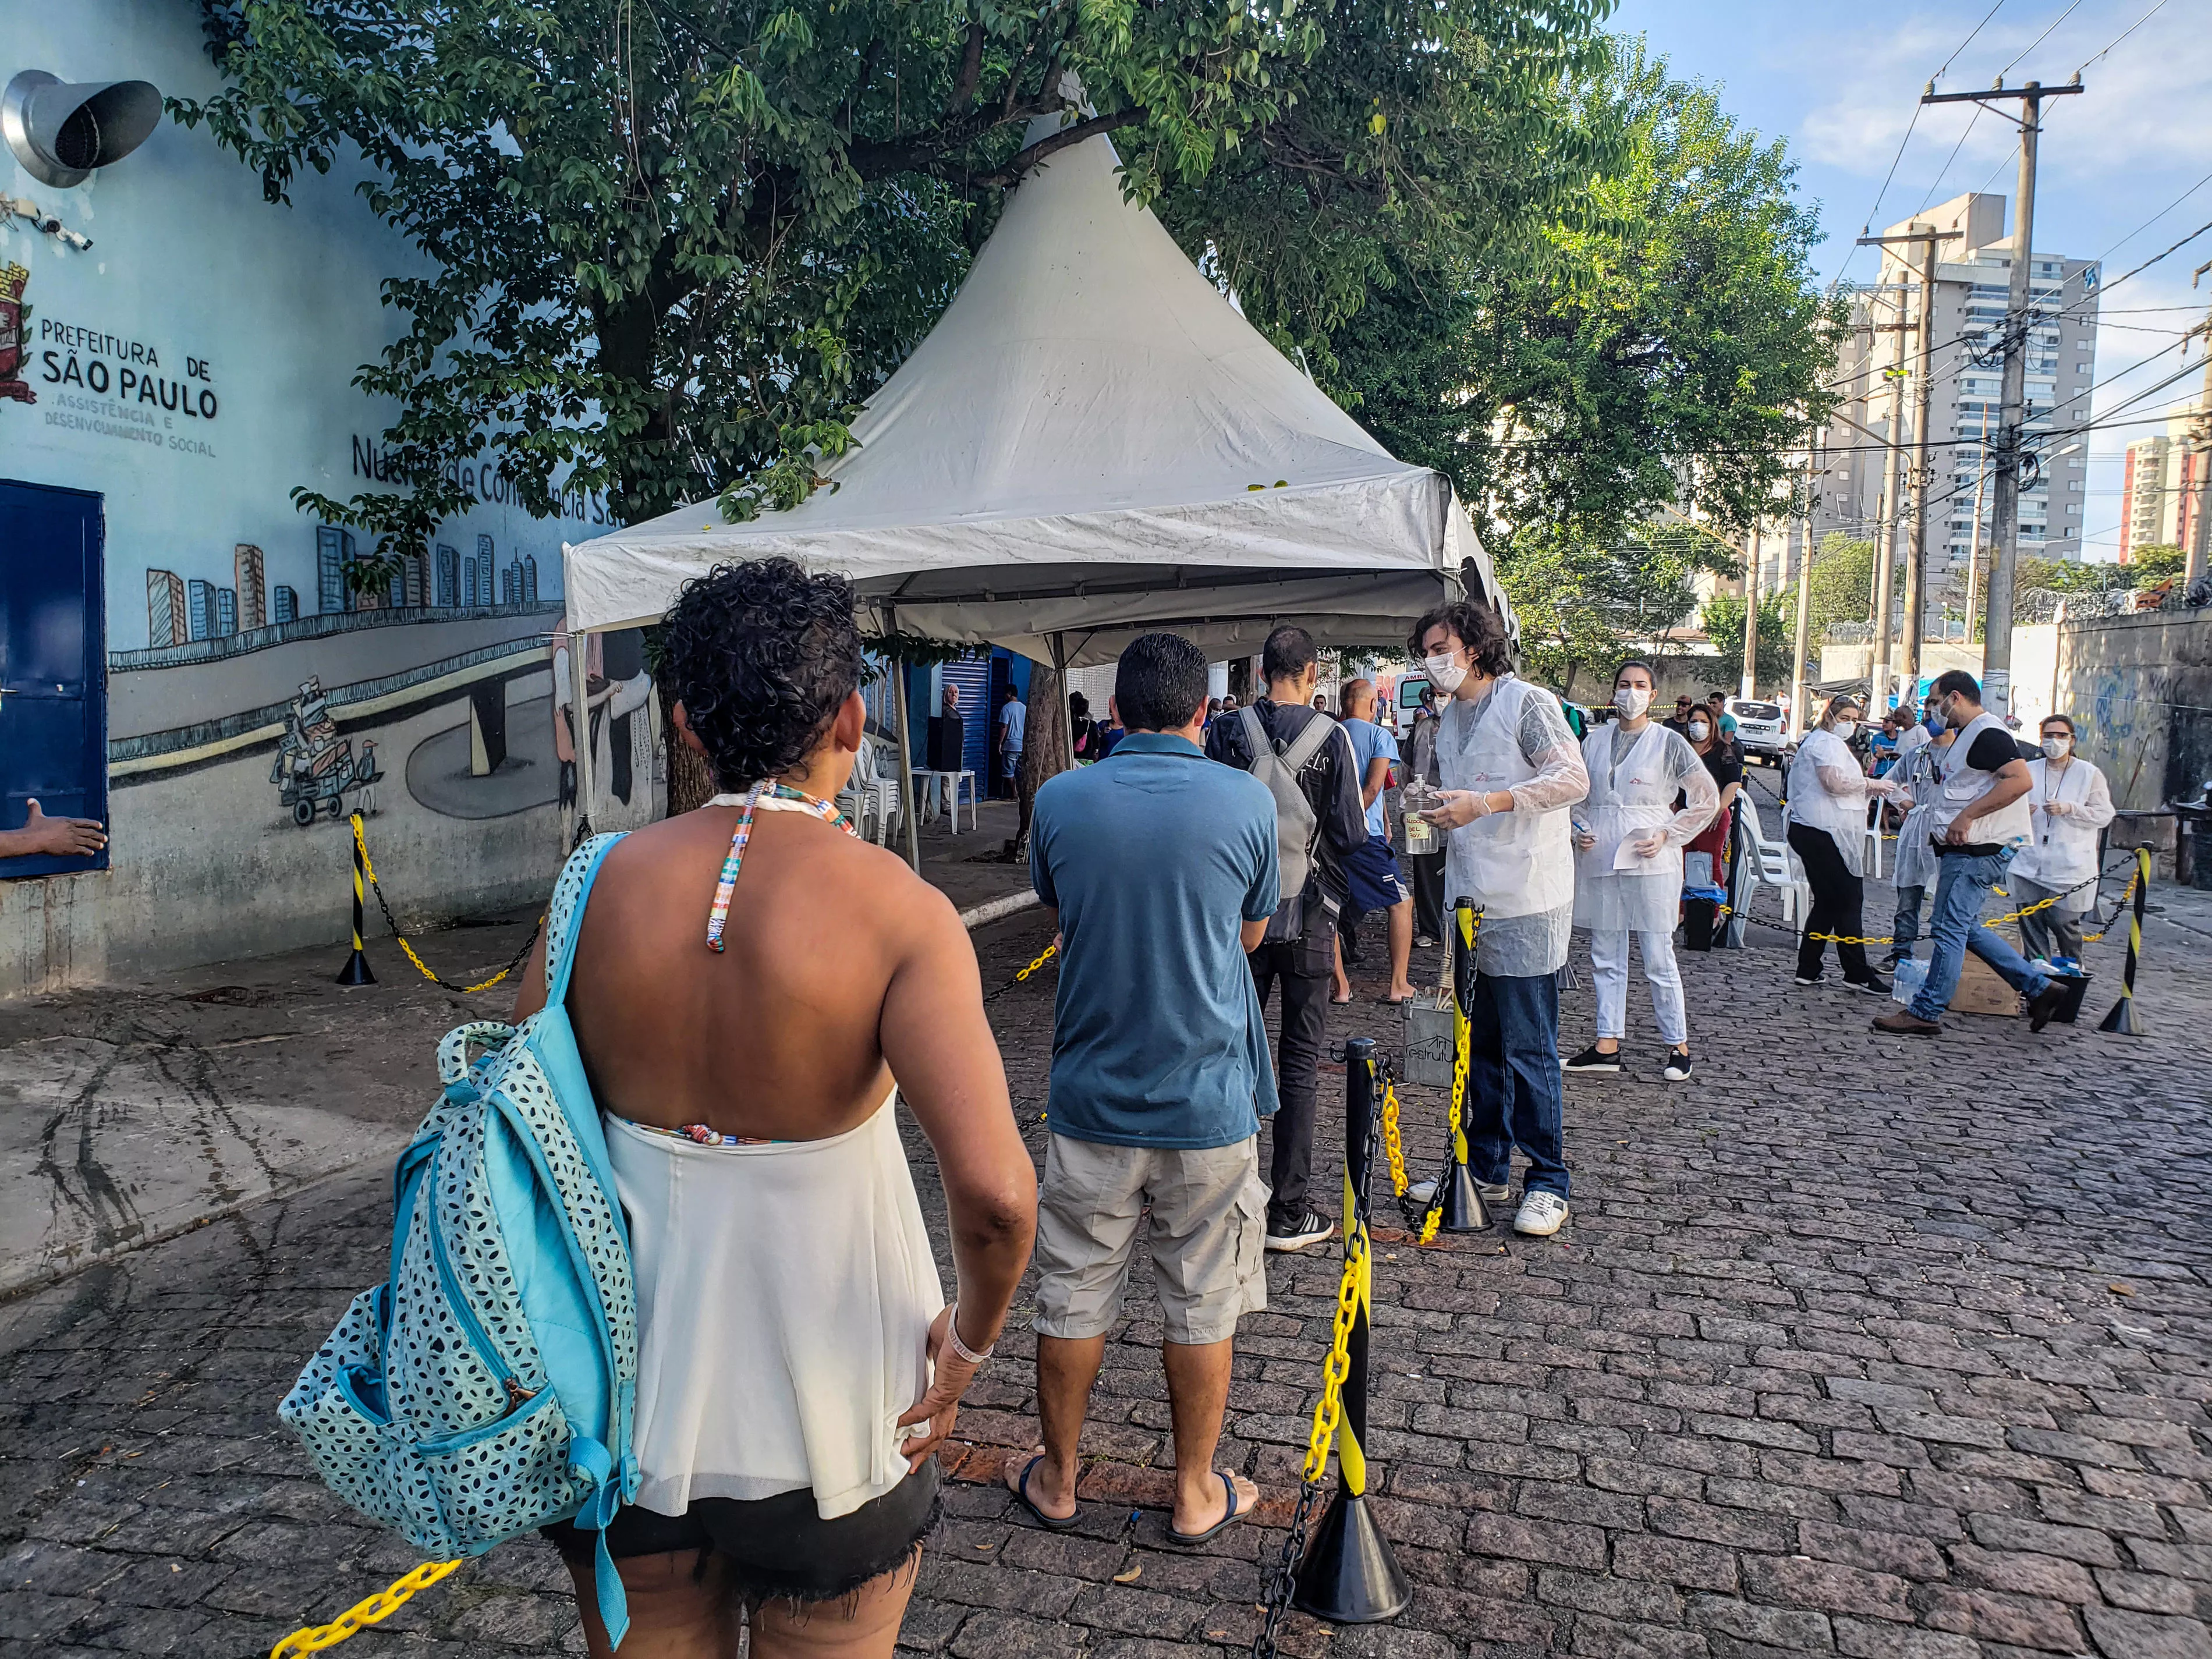 MSF evaluates and screens homeless people in shelters in downtown São Paulo. Activities also include health promotion.